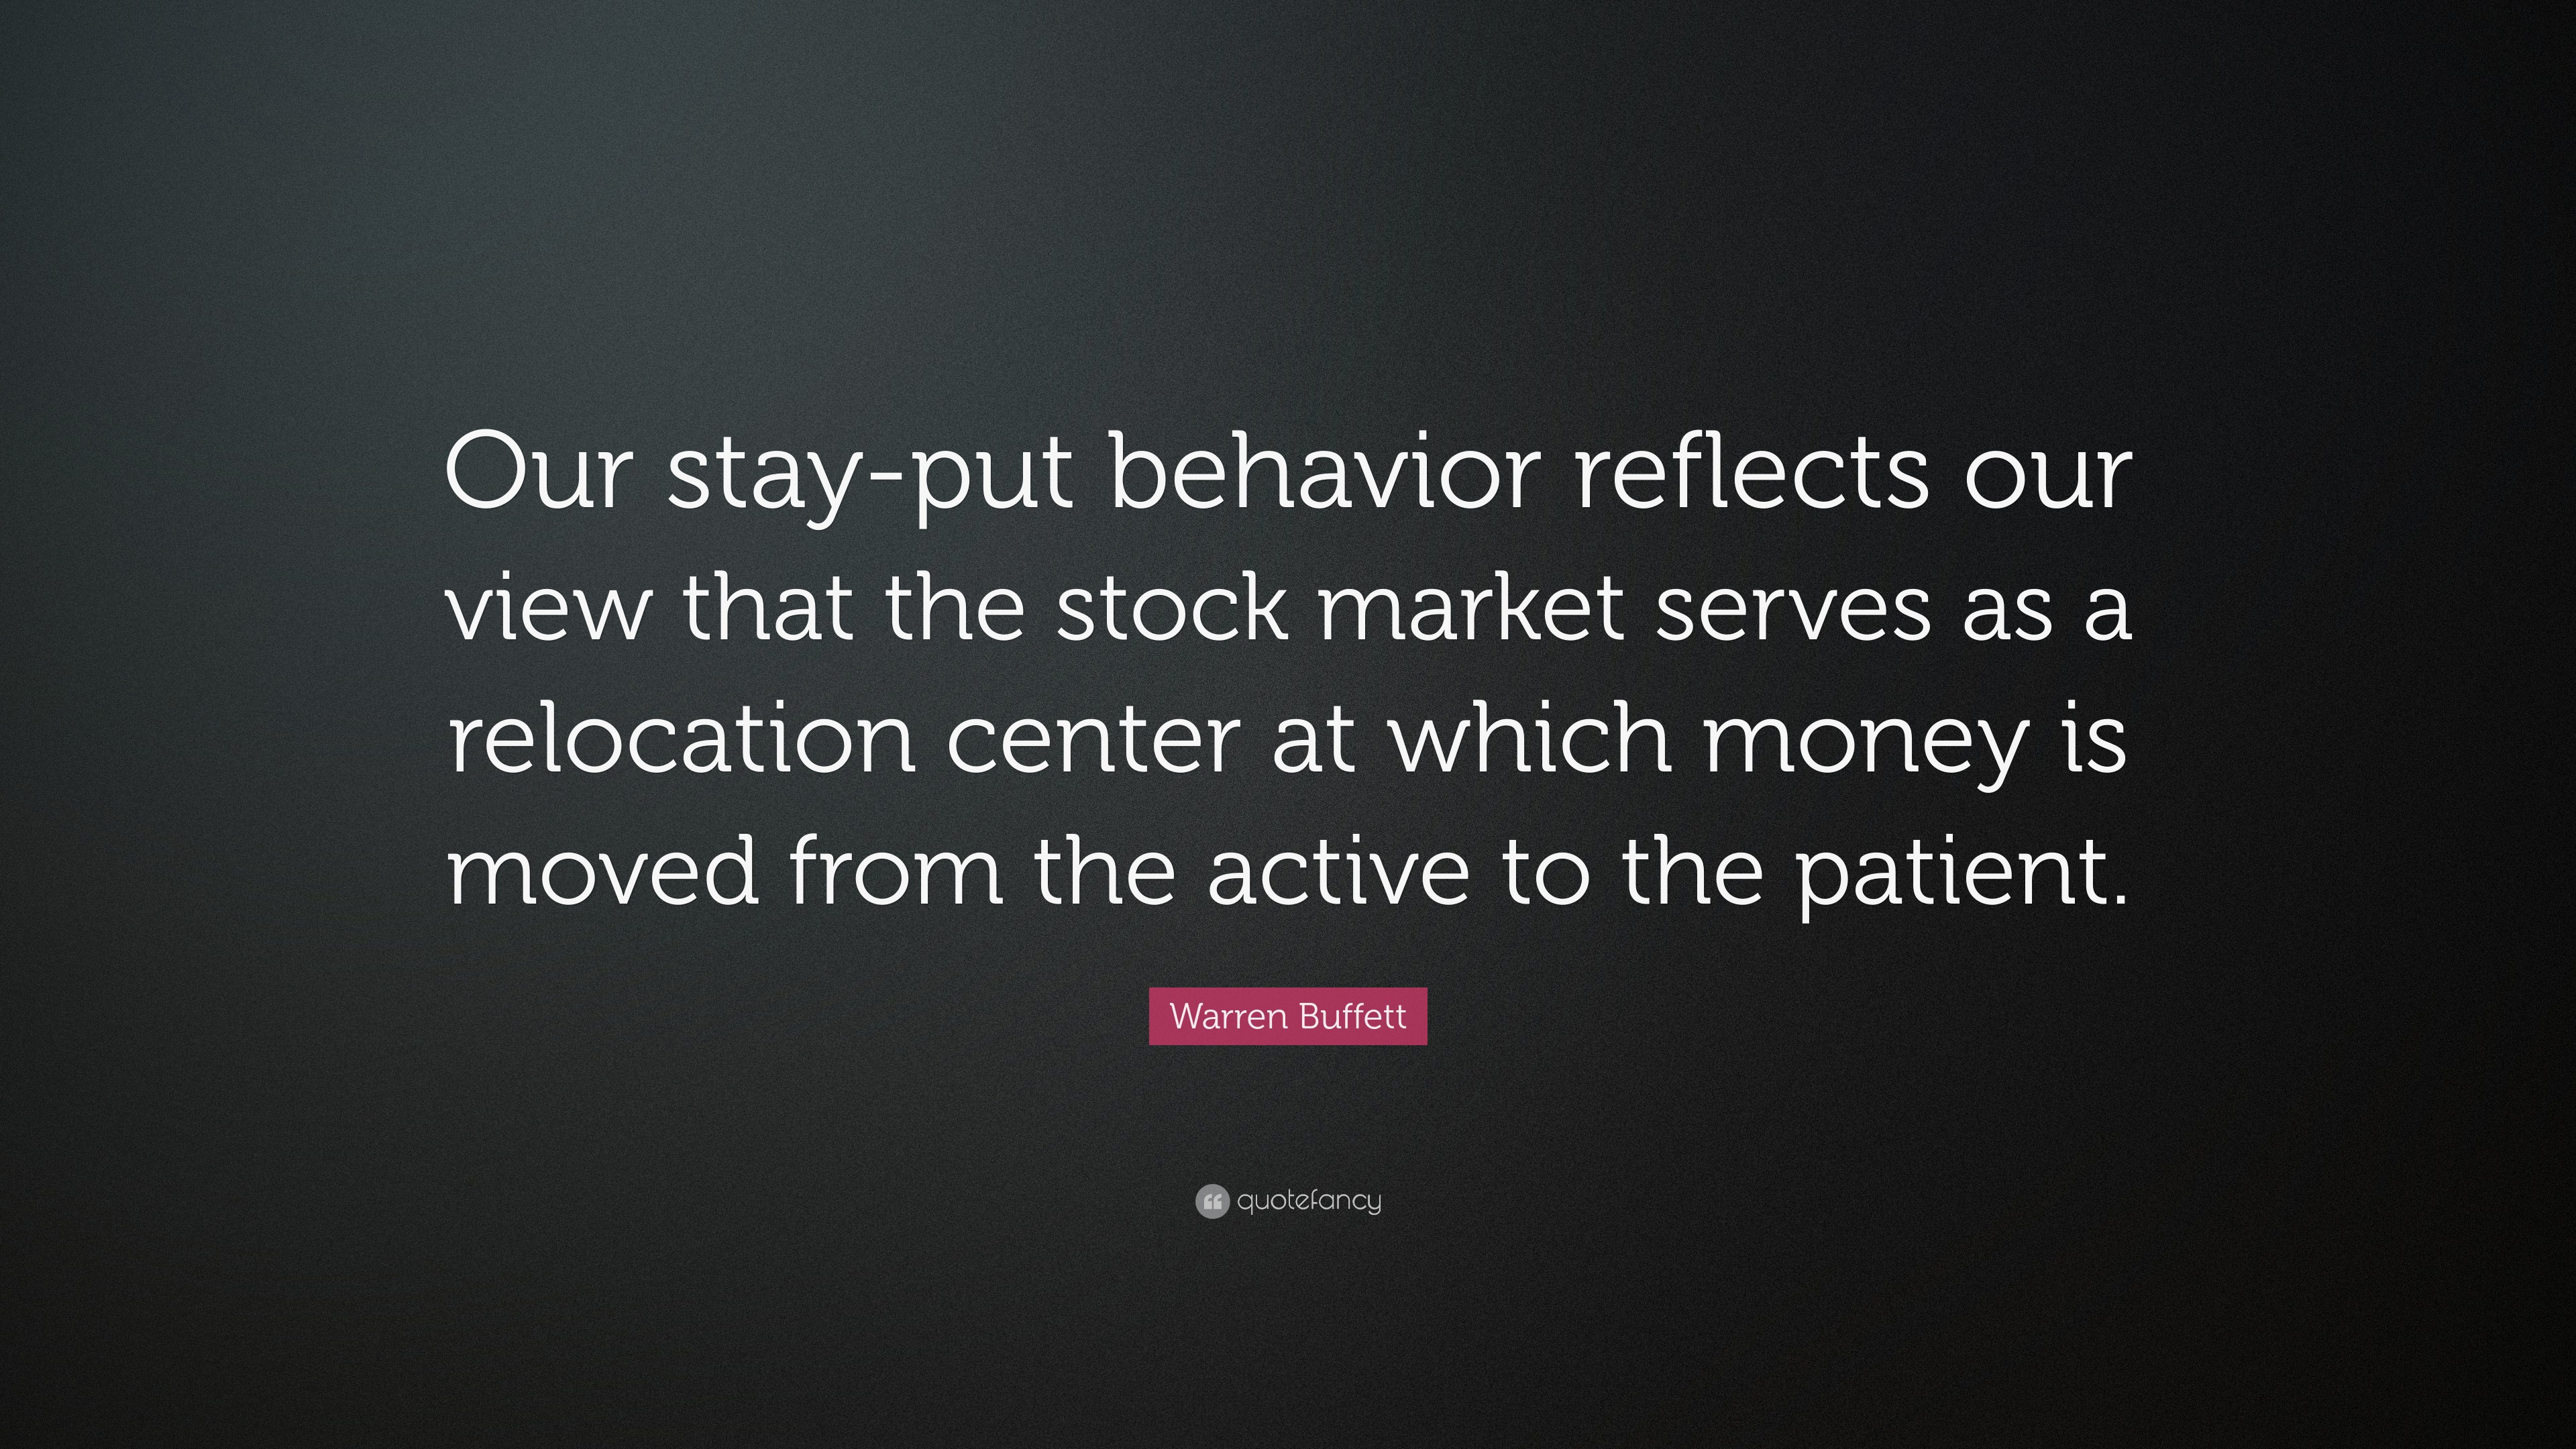 Warren Buffett Quote: “Our stay-put behavior reflects our view